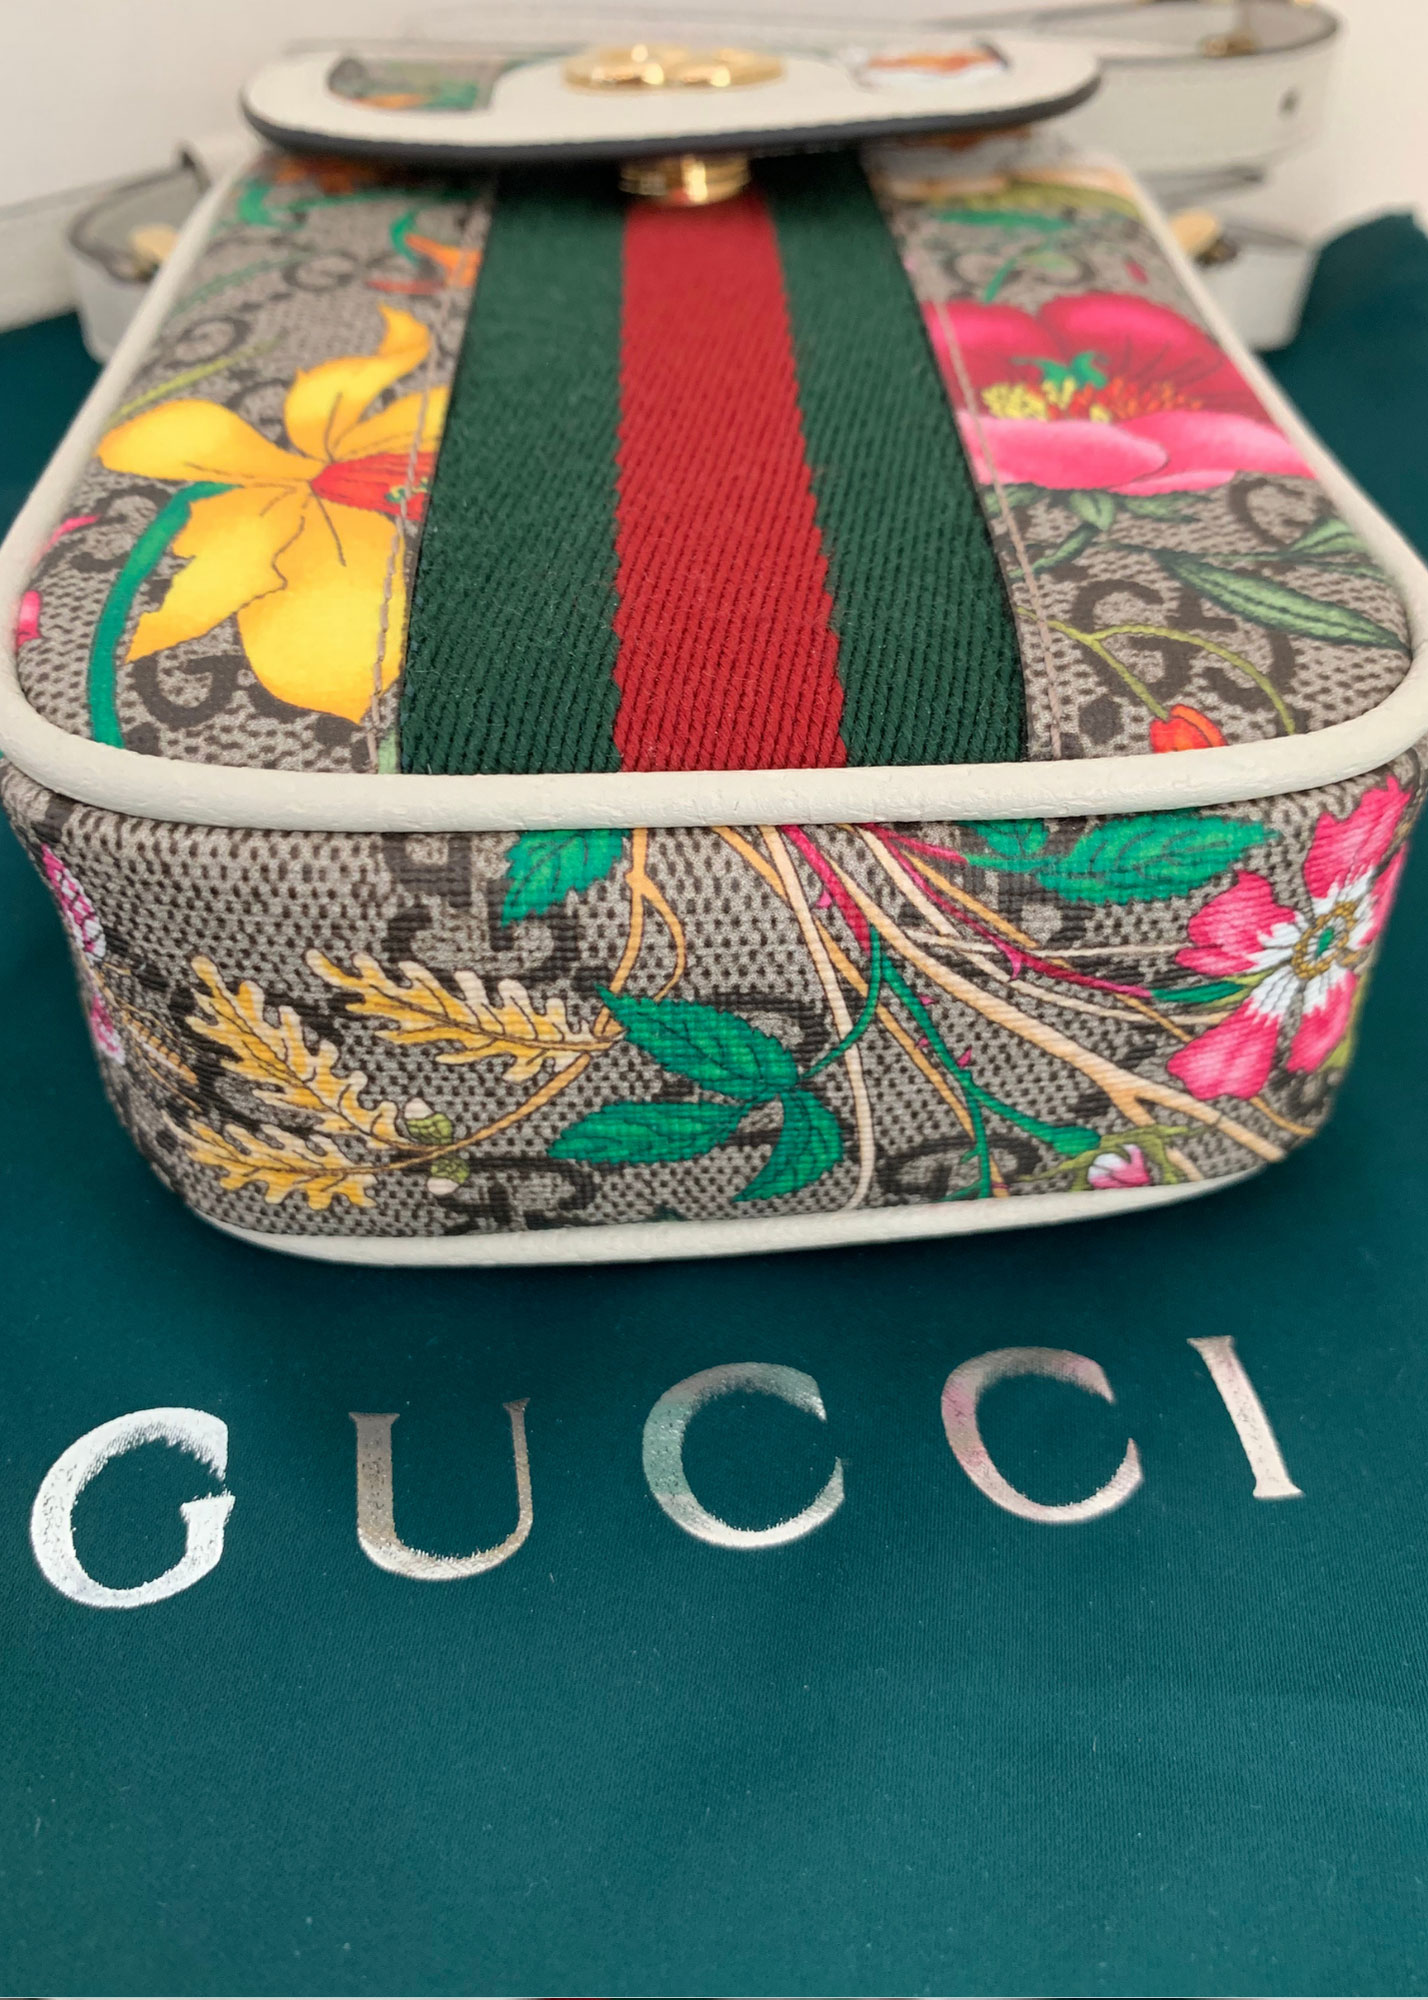 Gucci GG Supreme Ophidia Floral Crossbody Bag NEW